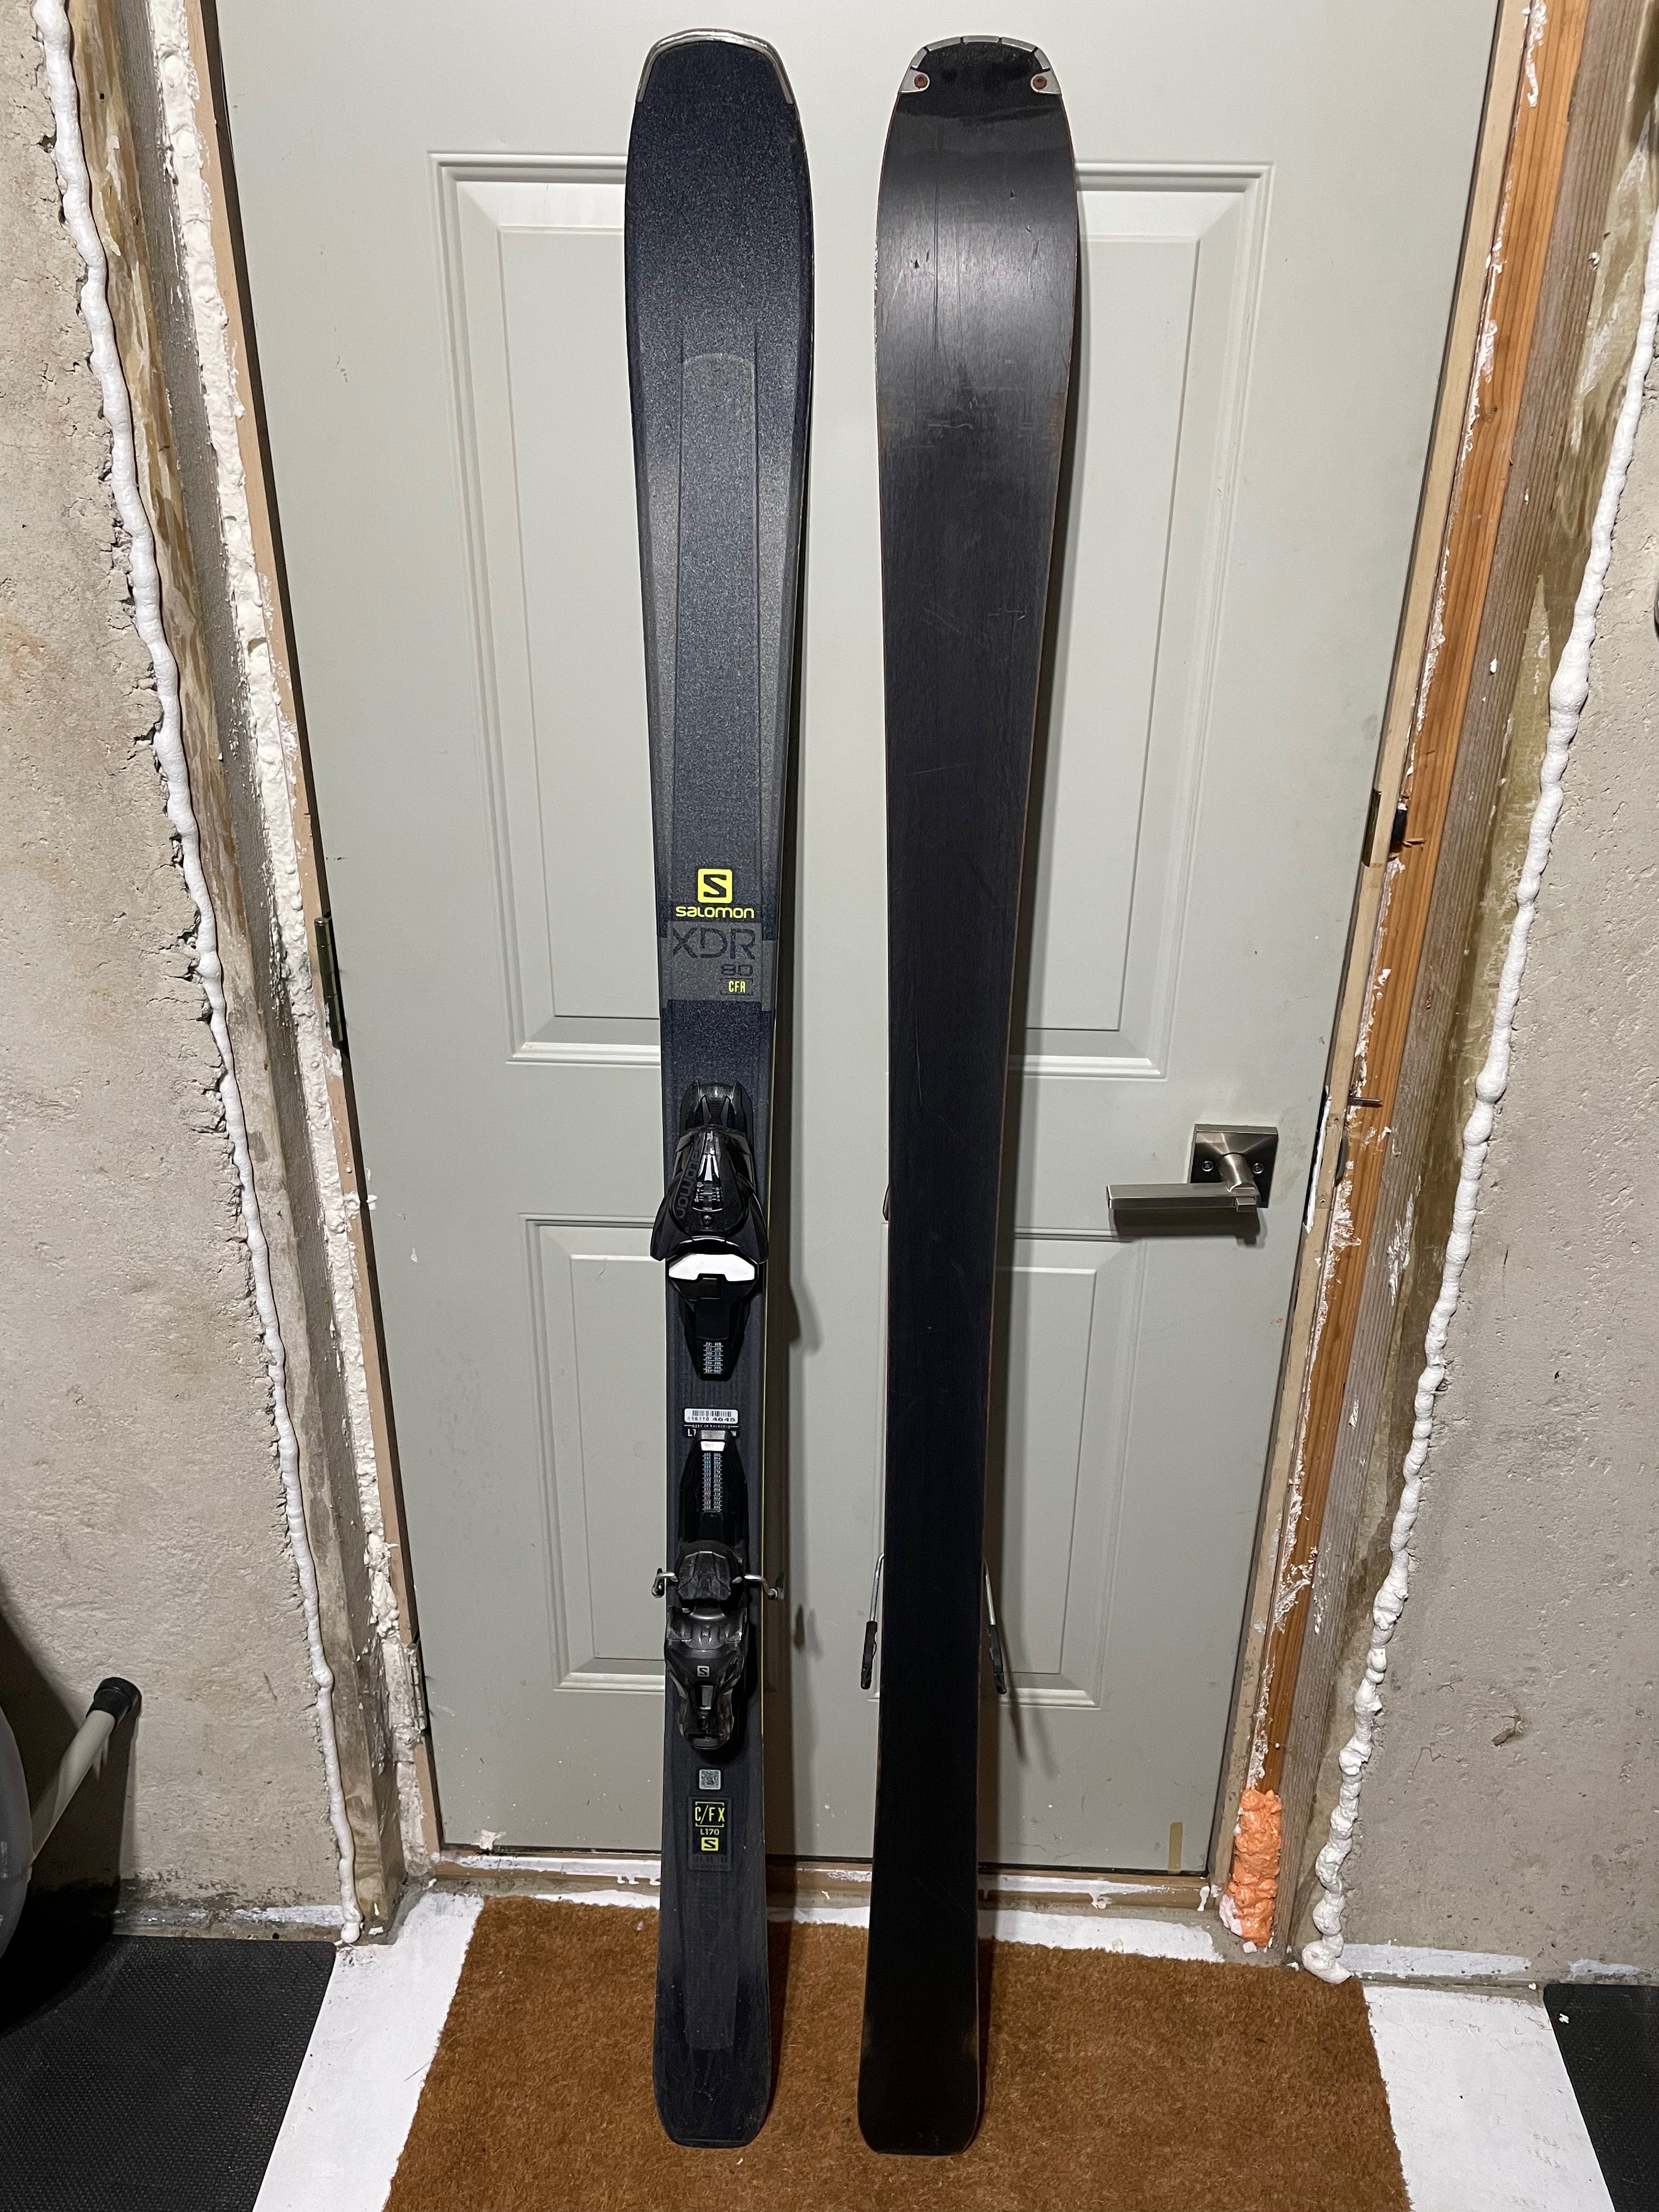 konvergens Fatal turnering Used Unisex 2018 Salomon 170 cm All Mountain XDR Skis With Bindings |  SidelineSwap